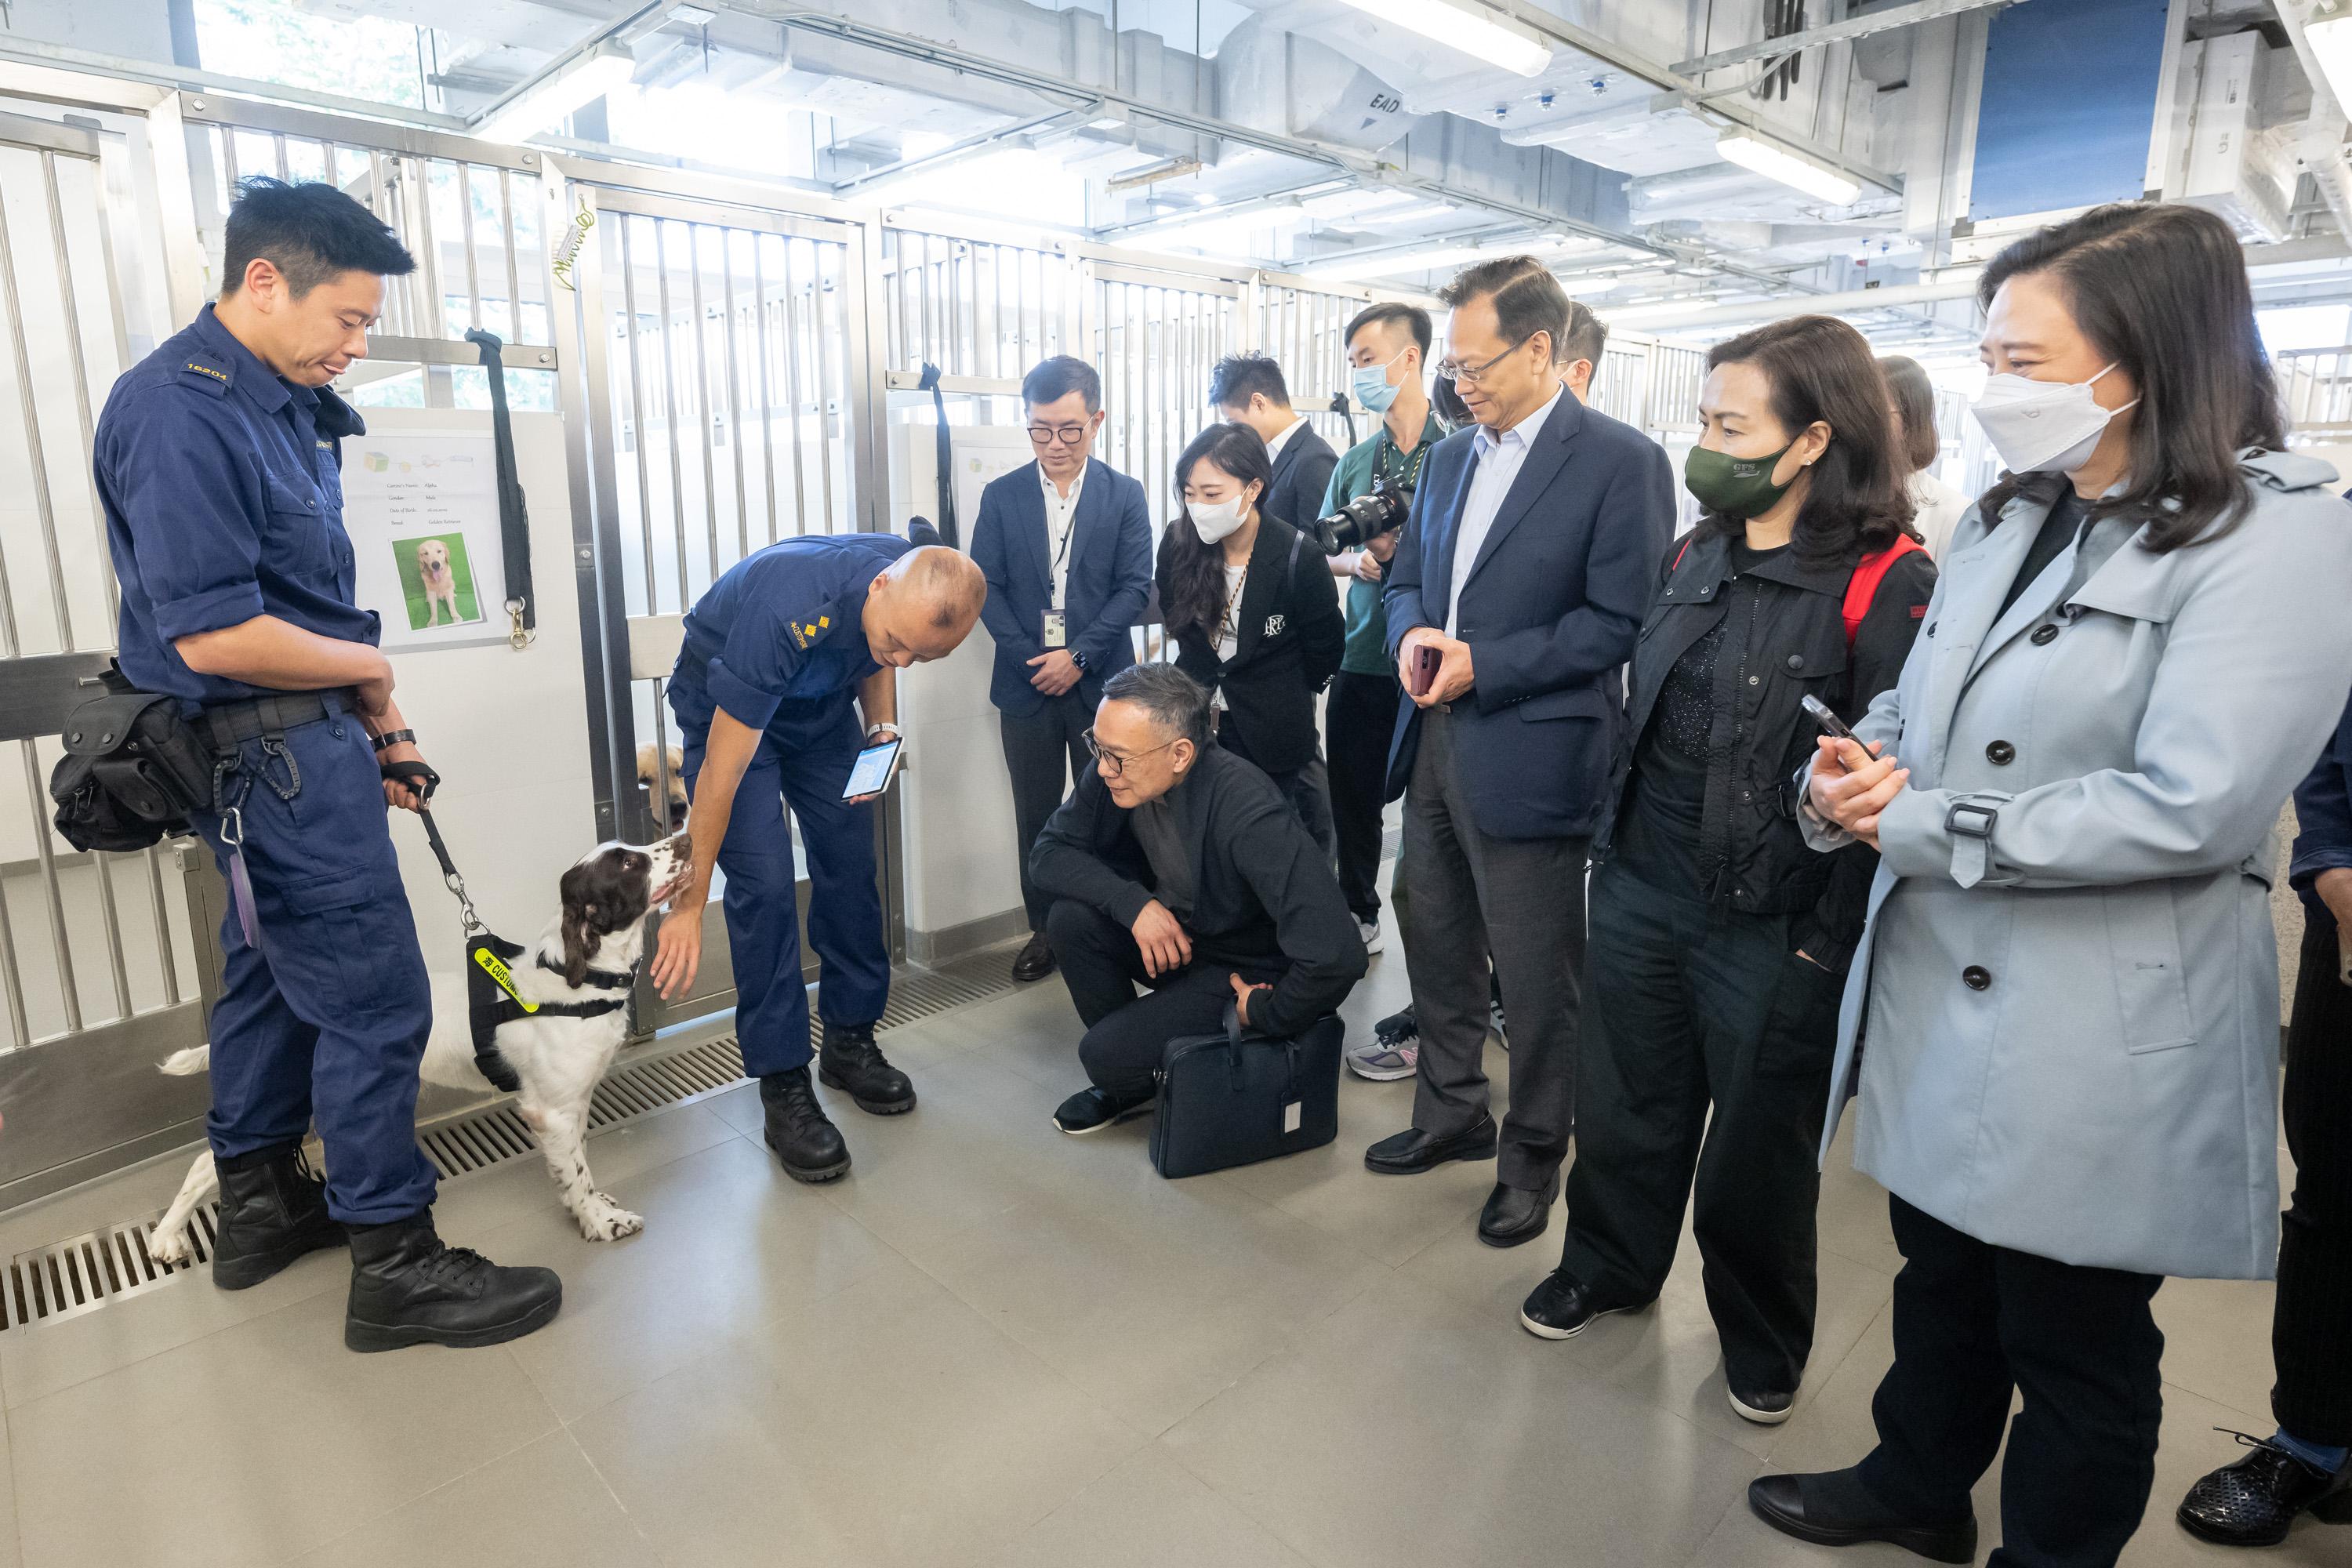 The Legislative Council (LegCo) Panel on Security visited facilities of two disciplined services today (May 9). Photo shows LegCo Members visiting the detector dog kennel in the Base of the Customs Canine Force at the Hong Kong-Zhuhai-Macao Bridge Base.